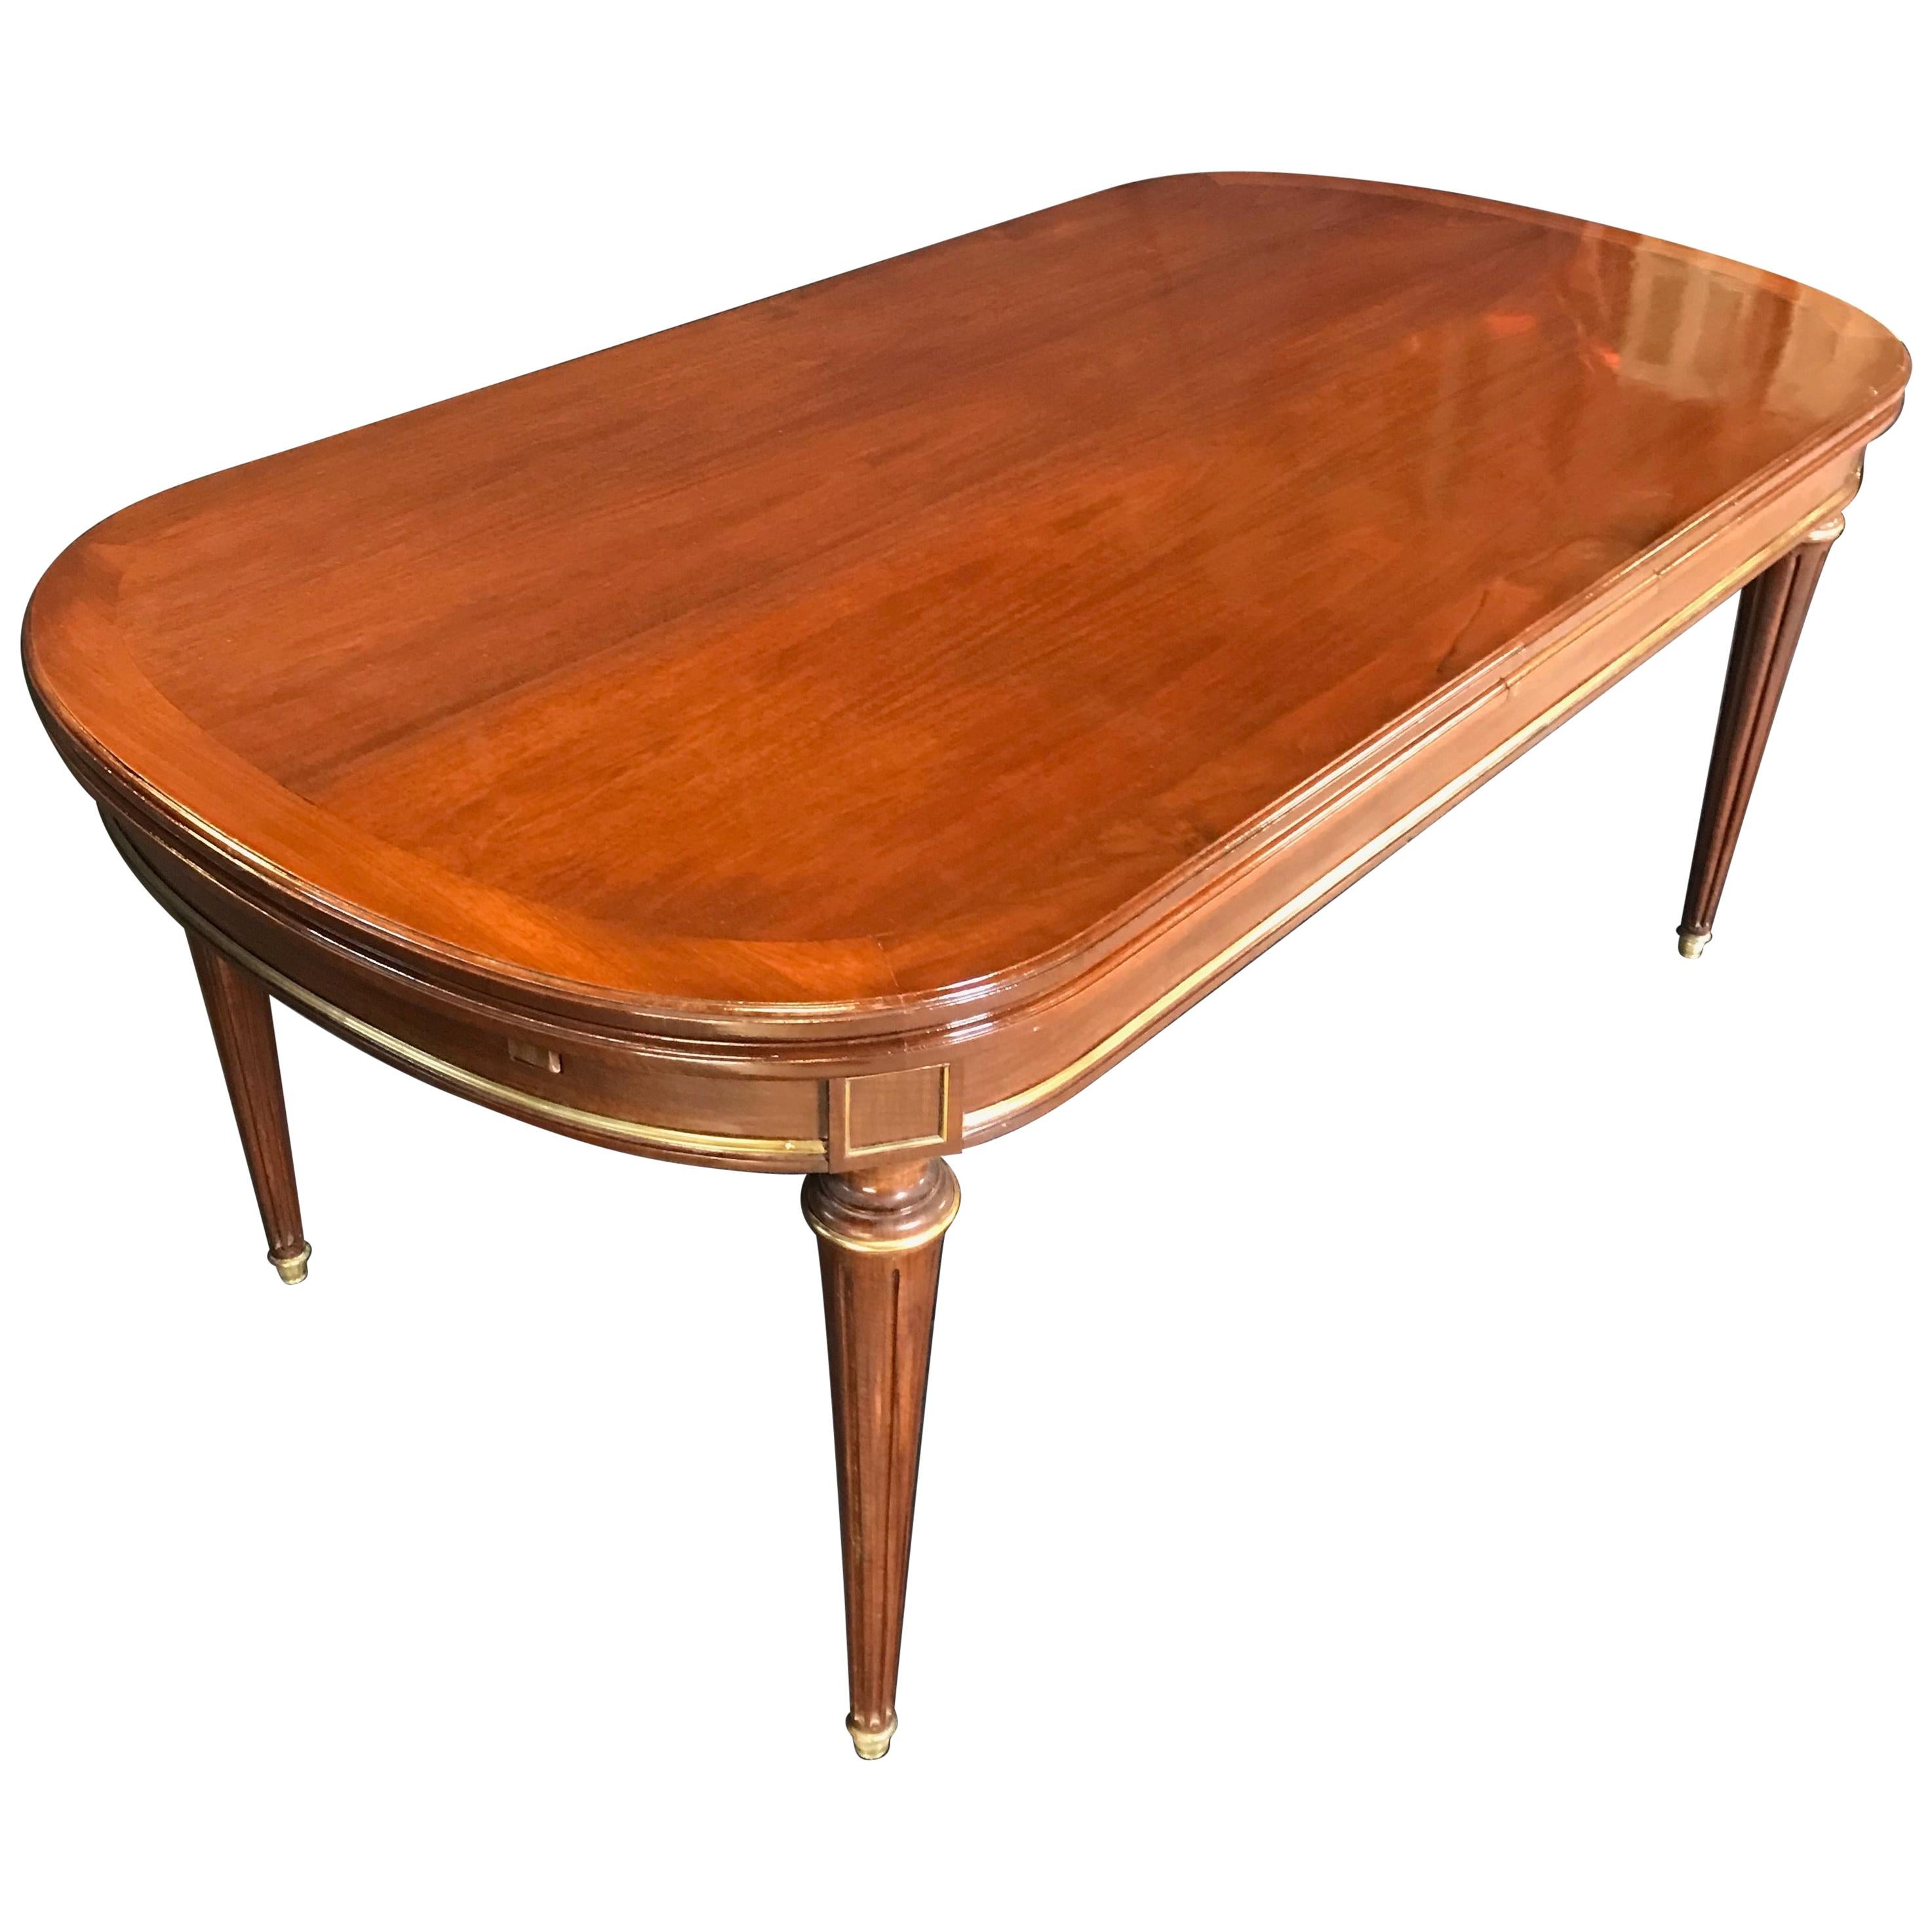 Louis XVI Oval Inlaid Fruitwood Dining Table with Two Leaves